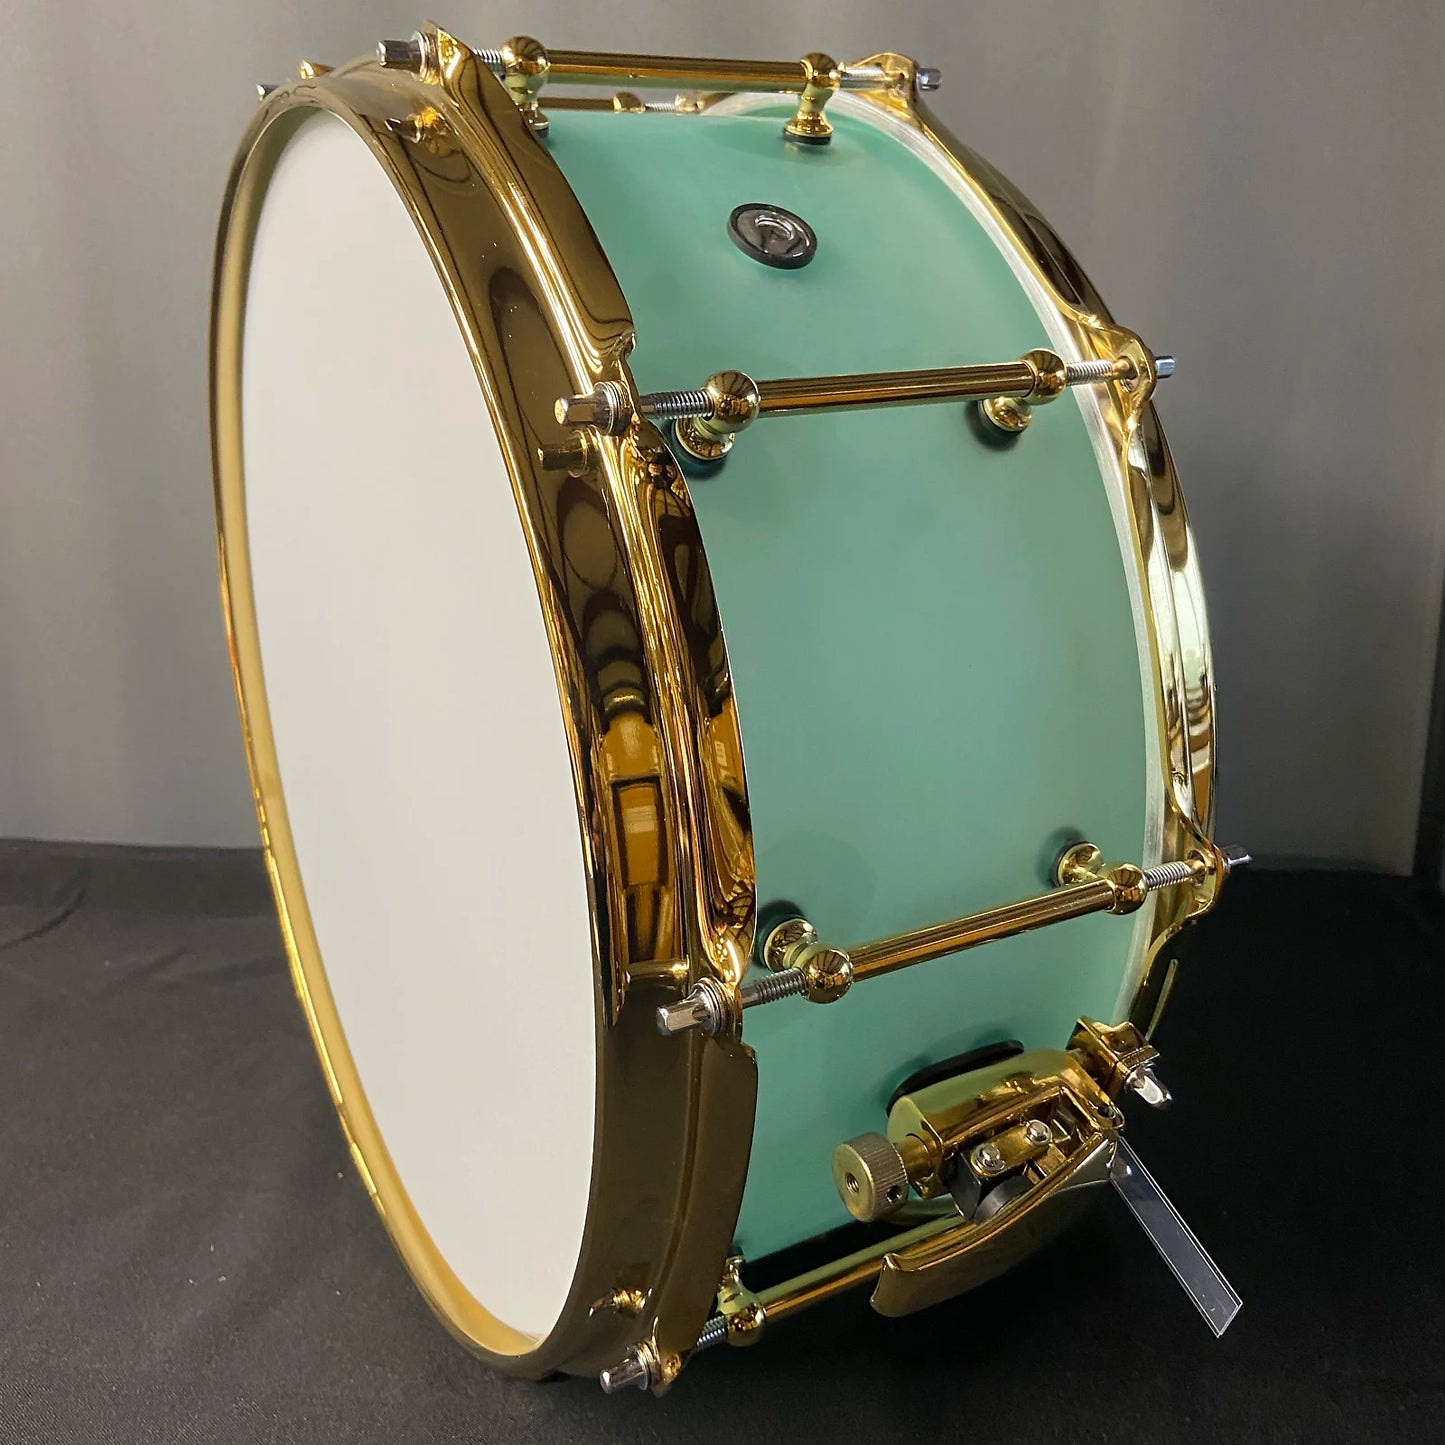 Frosted Green Acrylic Snare Drum